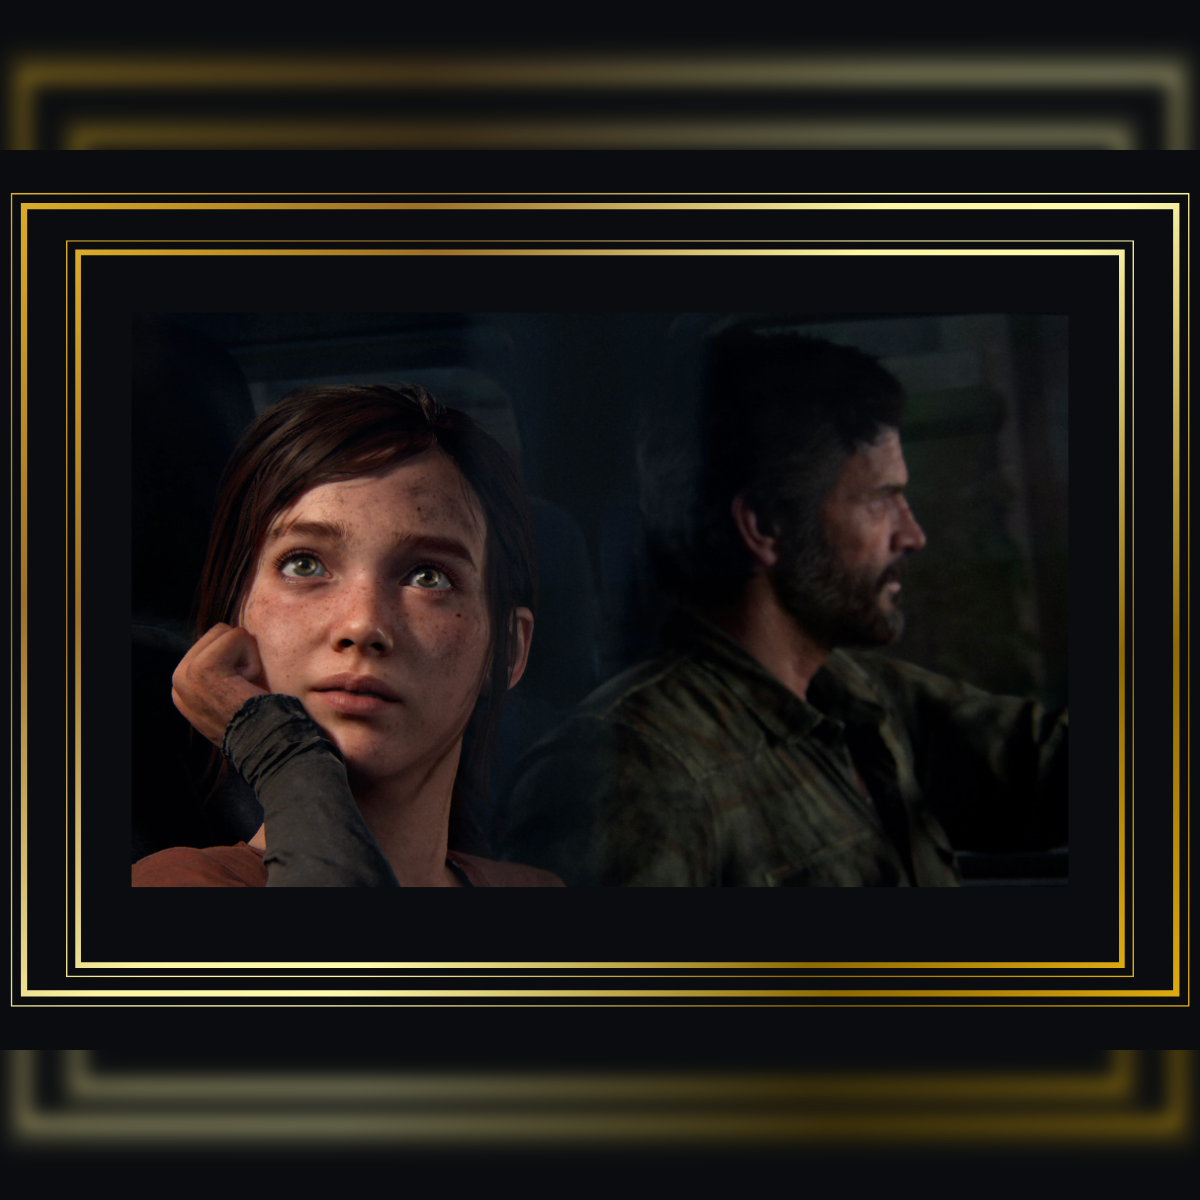 Last of Us Online: The Last of Us Online canceled, but what's